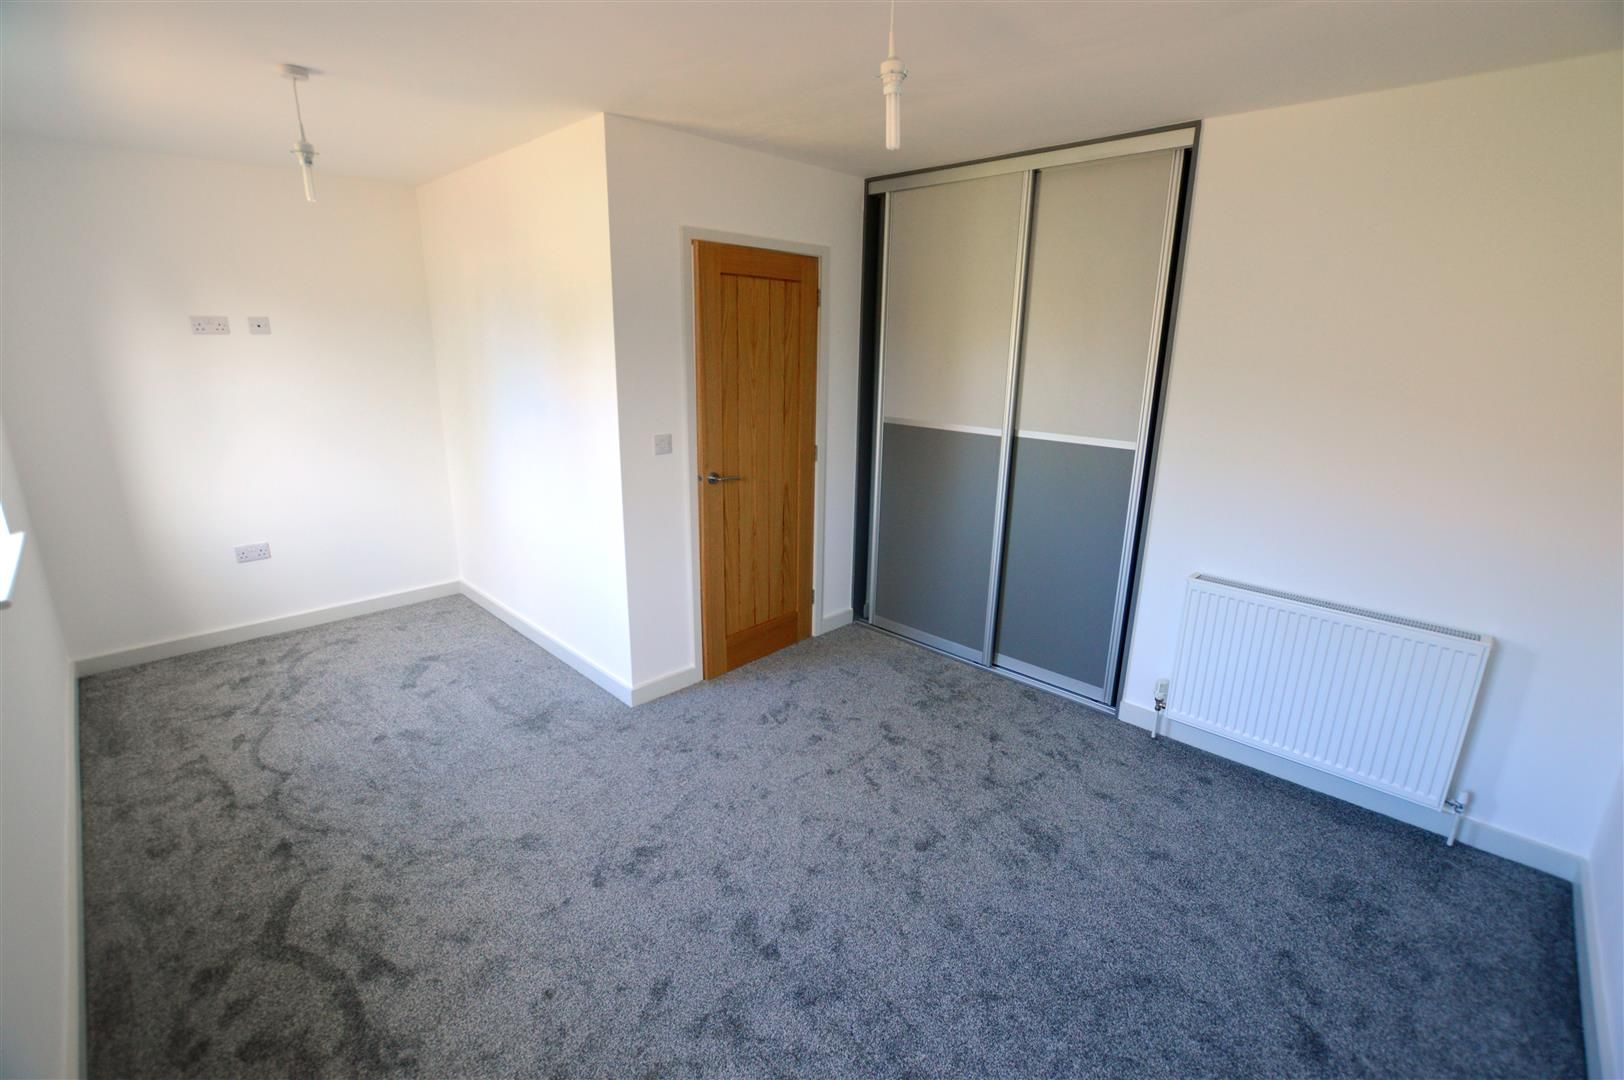 3 bed terraced for sale in Leominster  - Property Image 10